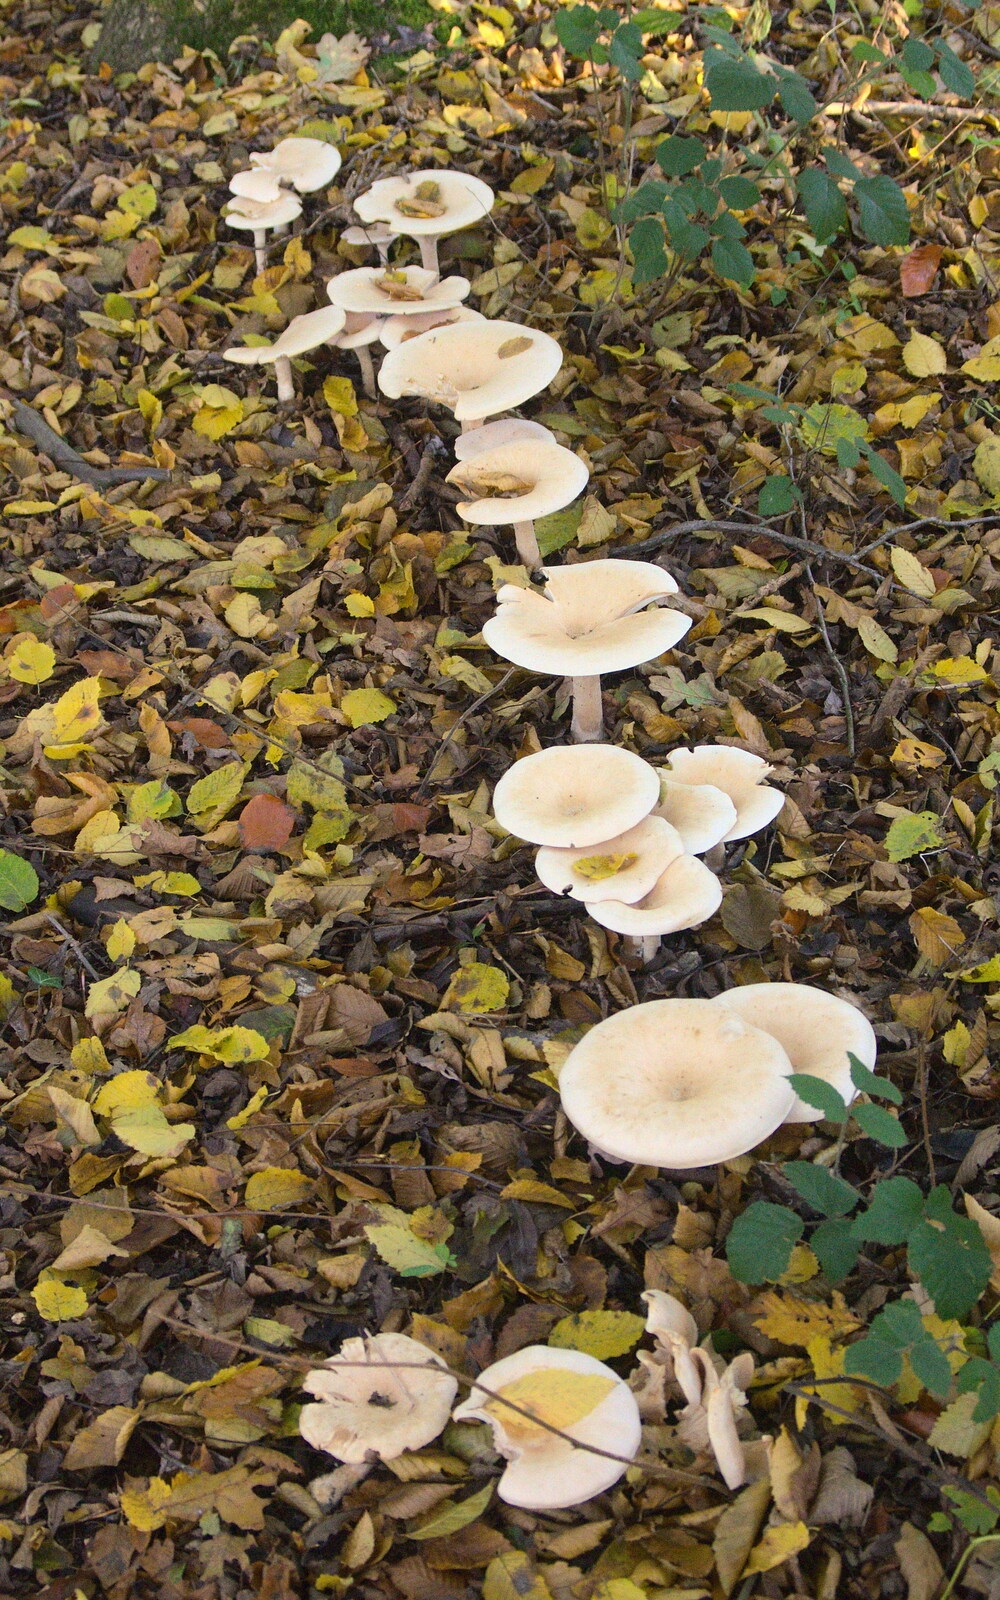 More mushrooms in a line from A Busy Day, Southwold and Thornham, Suffolk - 11th November 2012